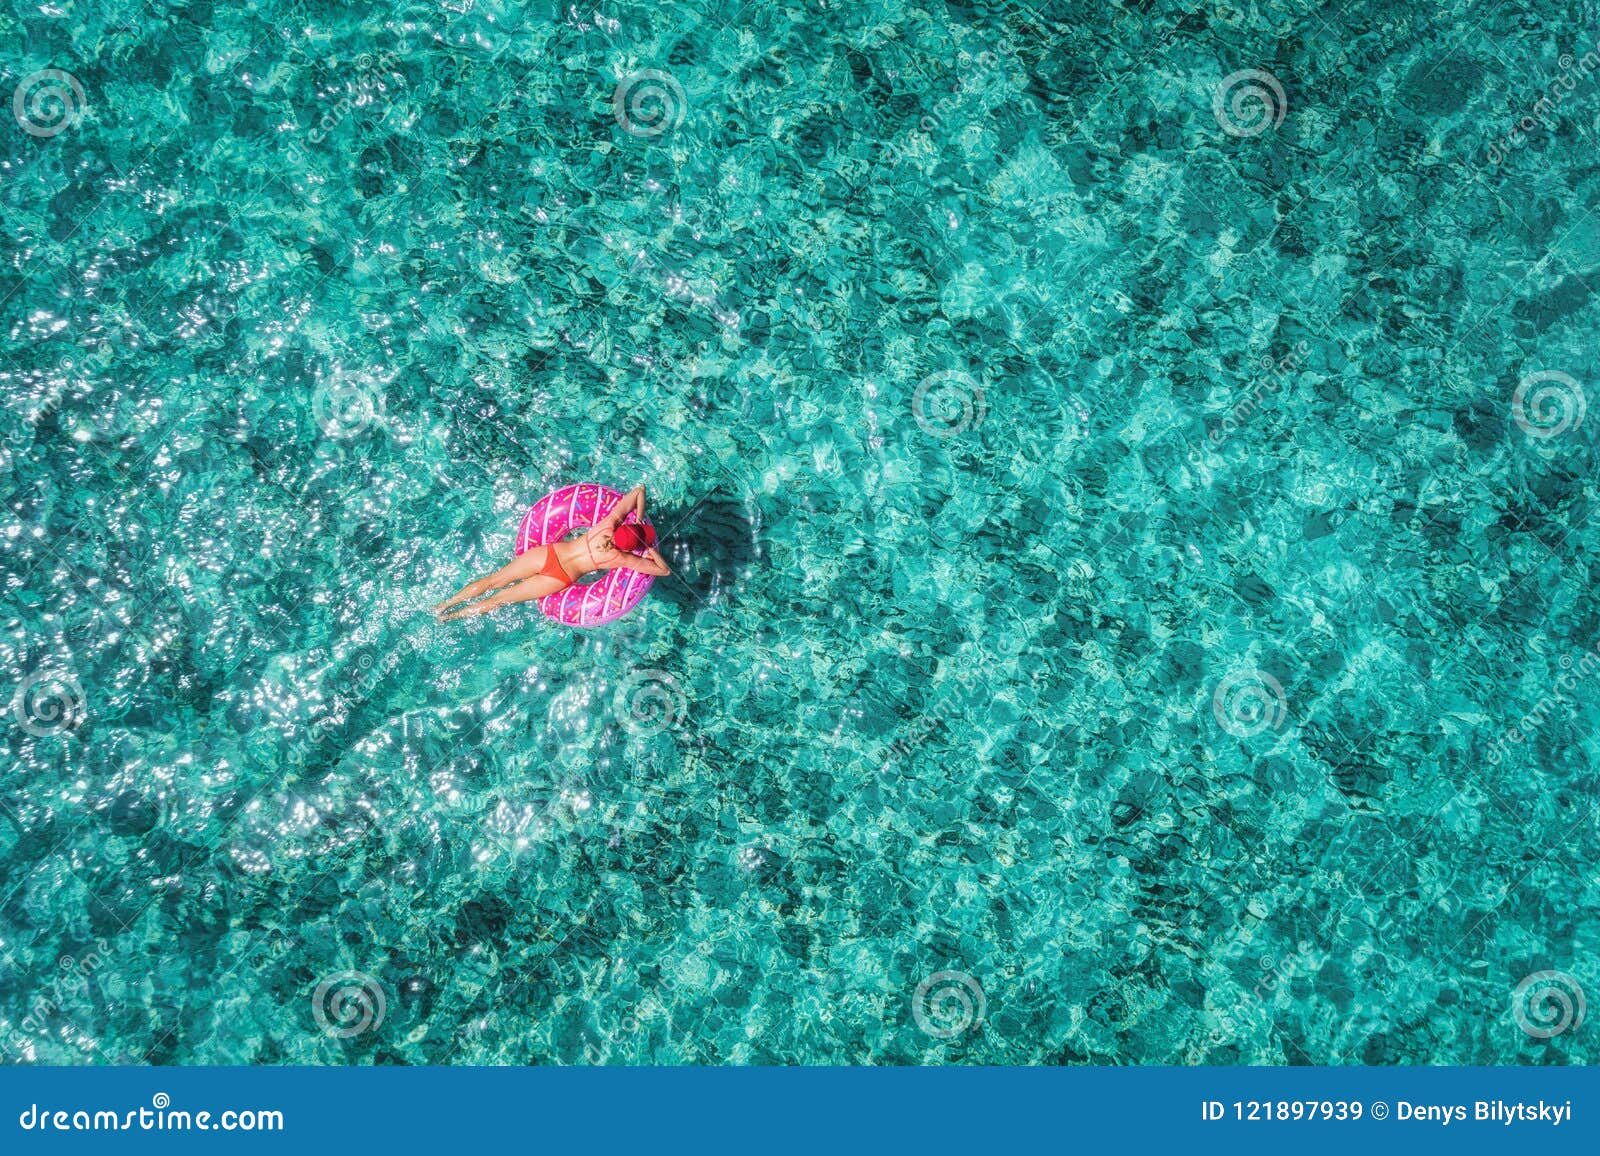 Aerial View of Woman on the Swim Ring in the Sea Stock Image - Image of ...